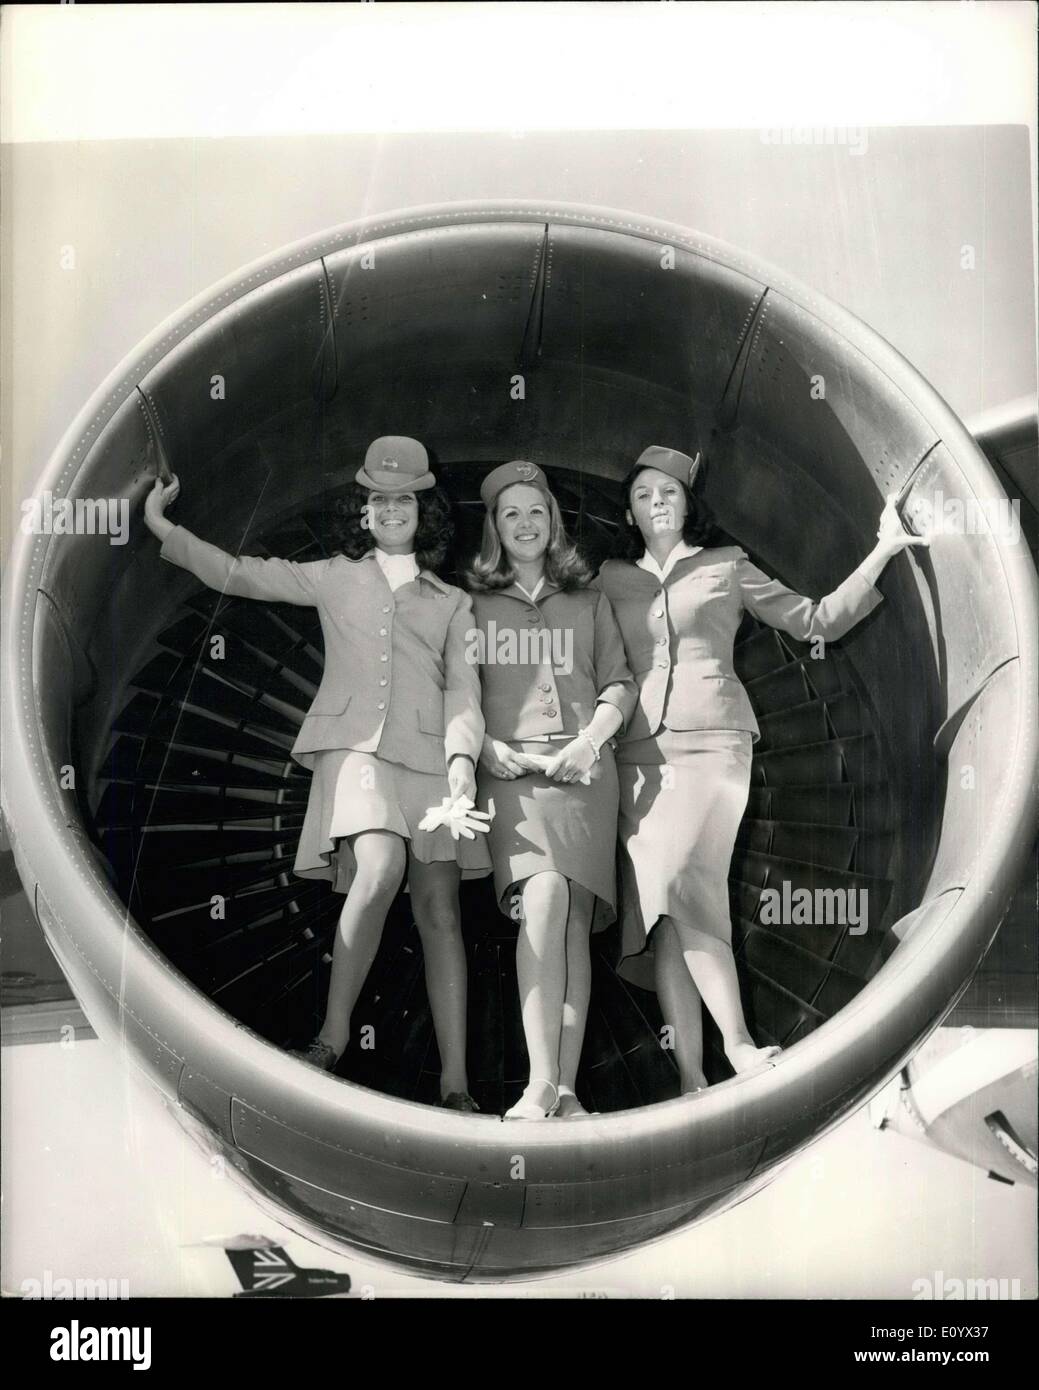 Sep. 07, 1971 - The Search Is On For Ex-Pan Am Stewatdesses In Britain: Pan American World Airways has lost some 150 ex-stewardesses in the United Kingdom and doesn't Know where to find them. Most of them are British girl who returned from U.S.A. bases to marry the boys they left behind, some brought with them Amjerican hiusband and other or Americans or Scandinavians who m,arried with Bristis men they met on the job. A But all most all hasve changed their names and adresses. The 'world's most expereinced airline'' is not trying to lure its most experienced girld back to home Stock Photo